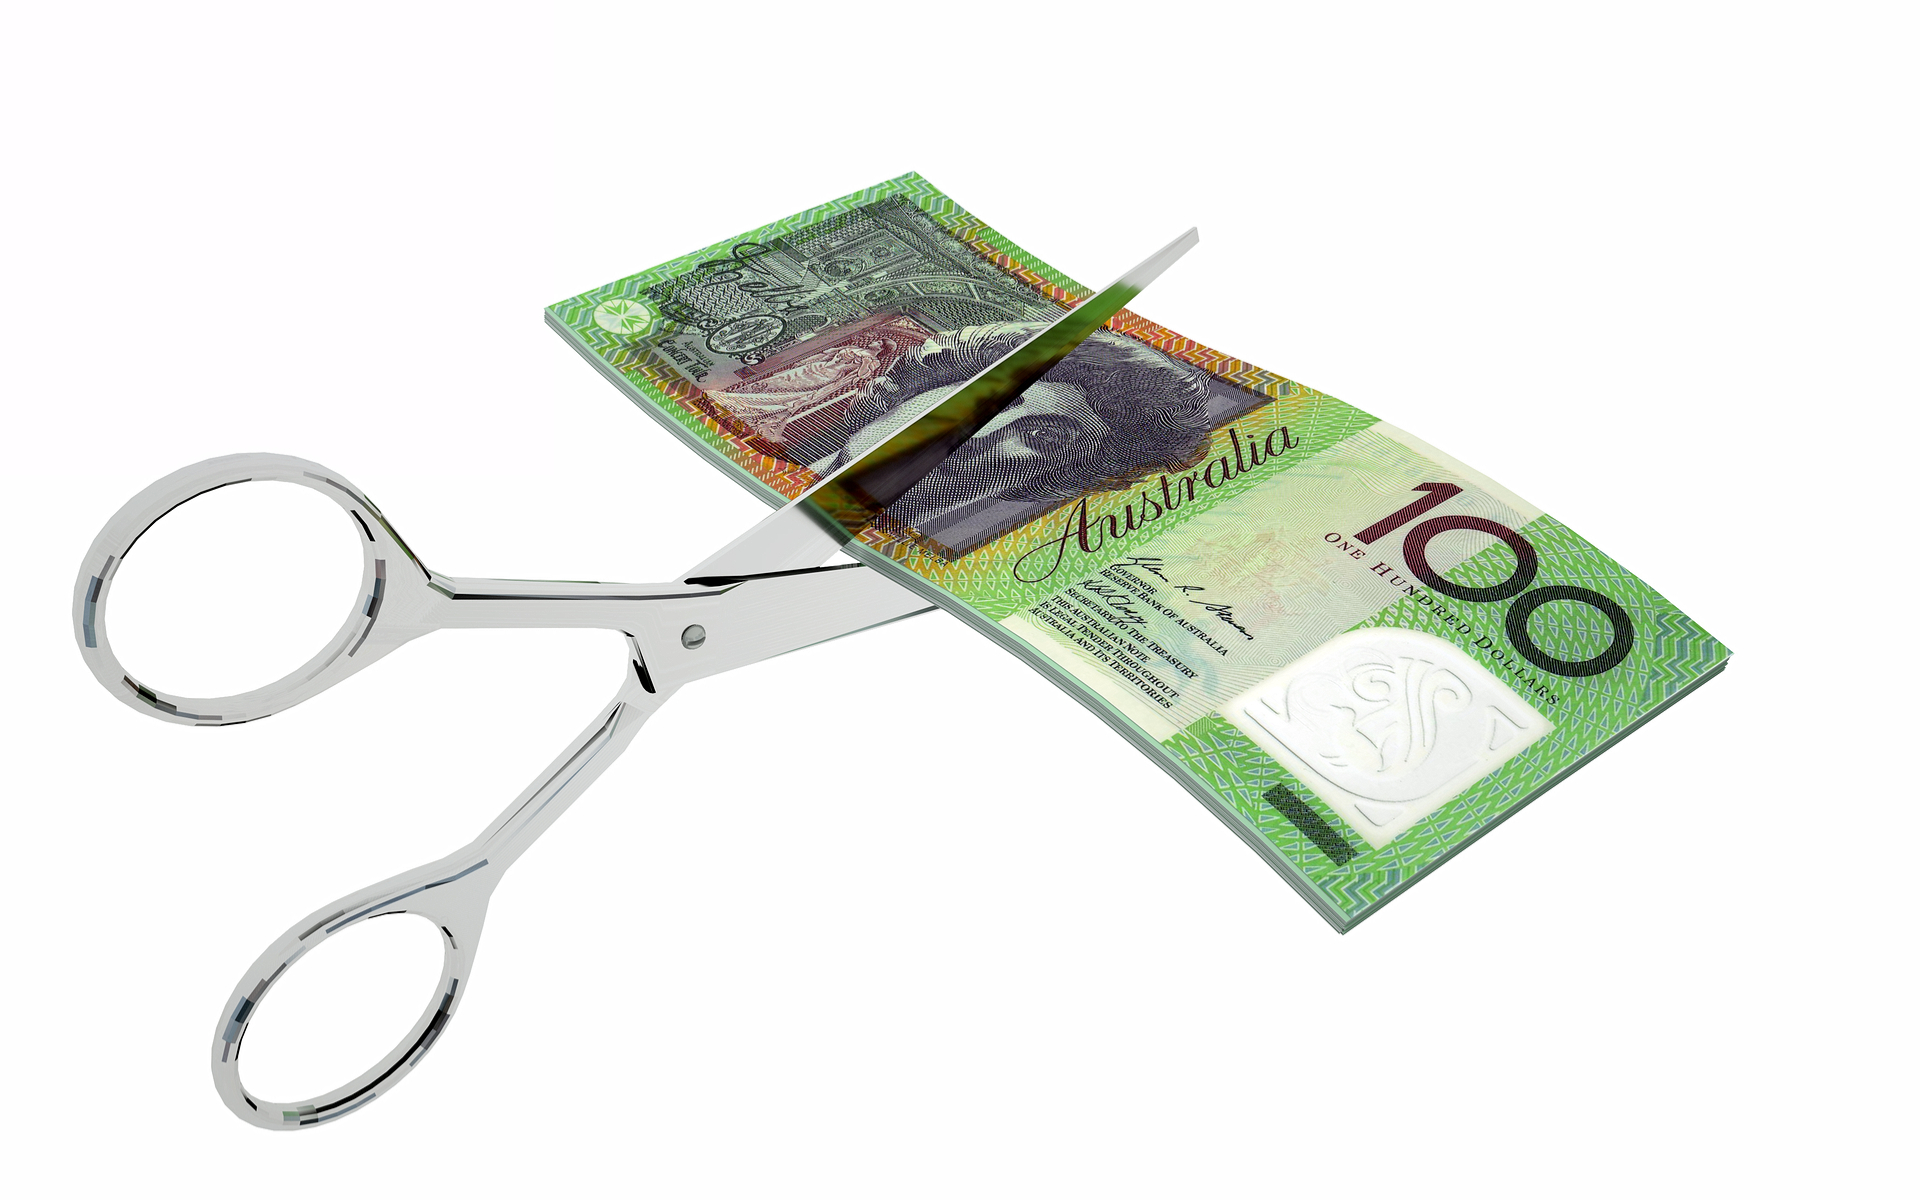 Unholy Trinity: Australia Joins in Cash Crunch, $100 Bills Could Go